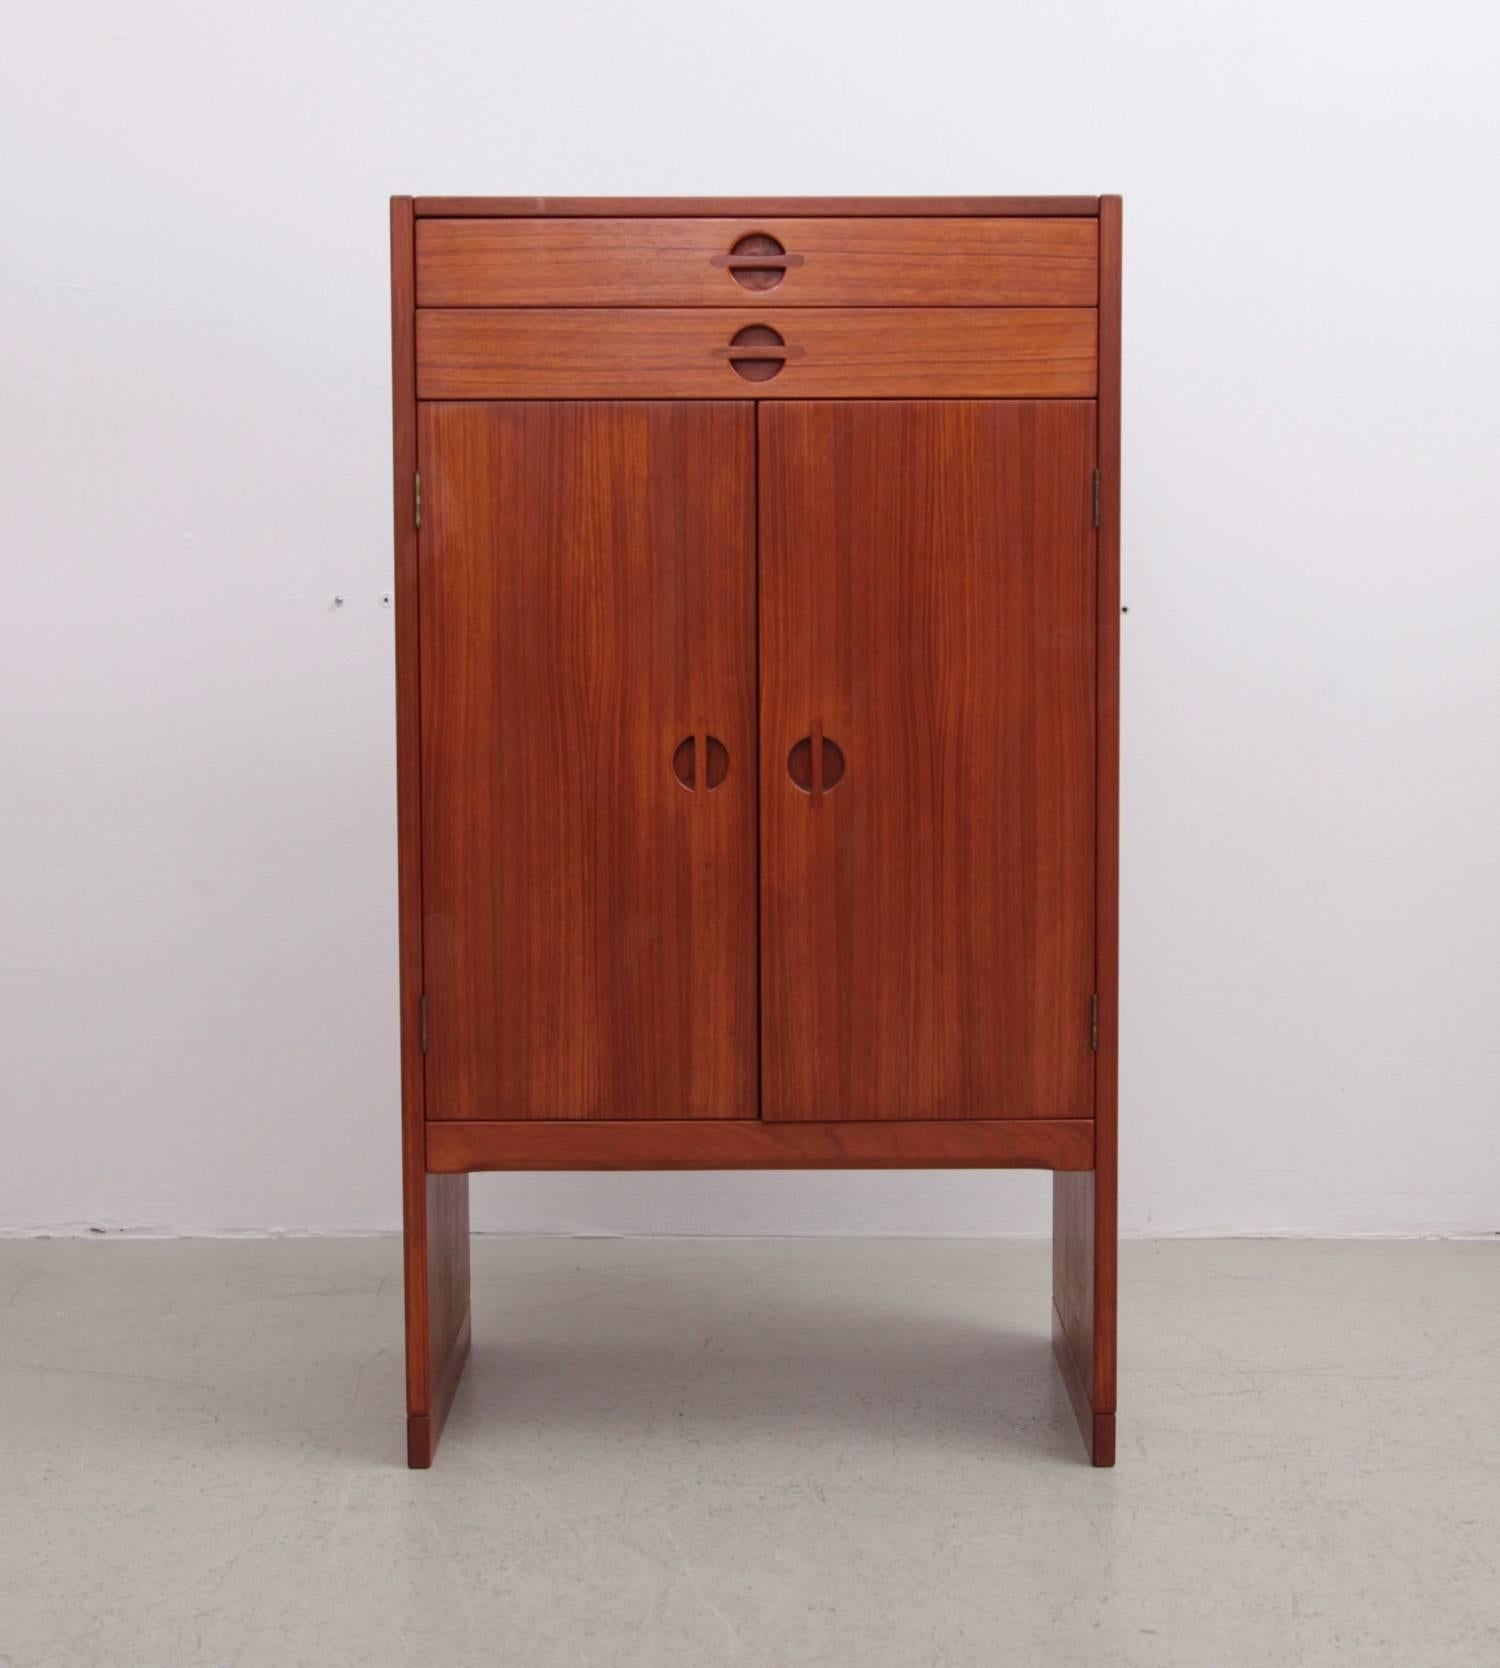 This cabinet is in excellent condition and signed #690 by Aksel Kjersgaard.
Very high quality as known for this designer.
   